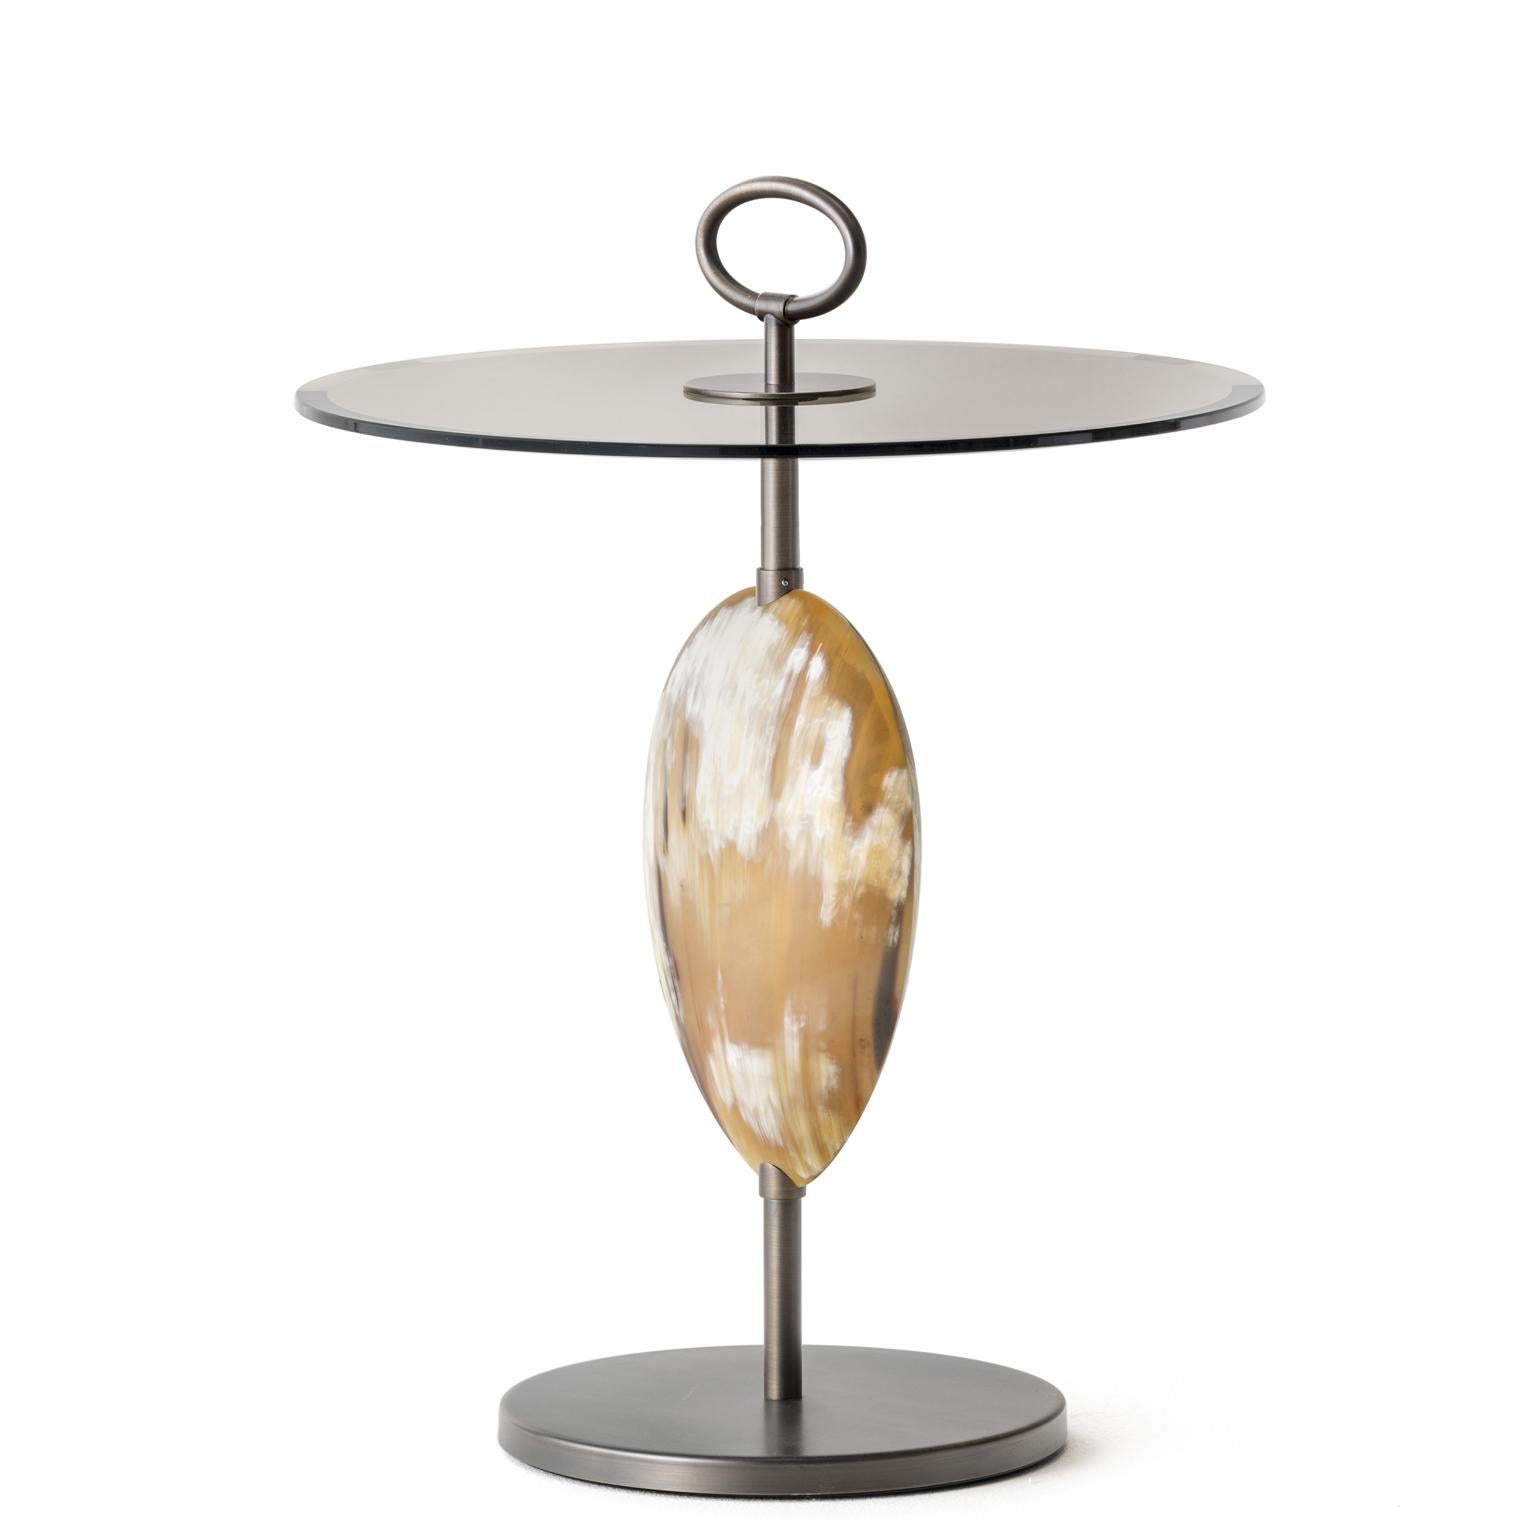 Contemporary Macari Side Table in Corno Italiano, Glass and Stainless Steel, Mod. 1870 For Sale